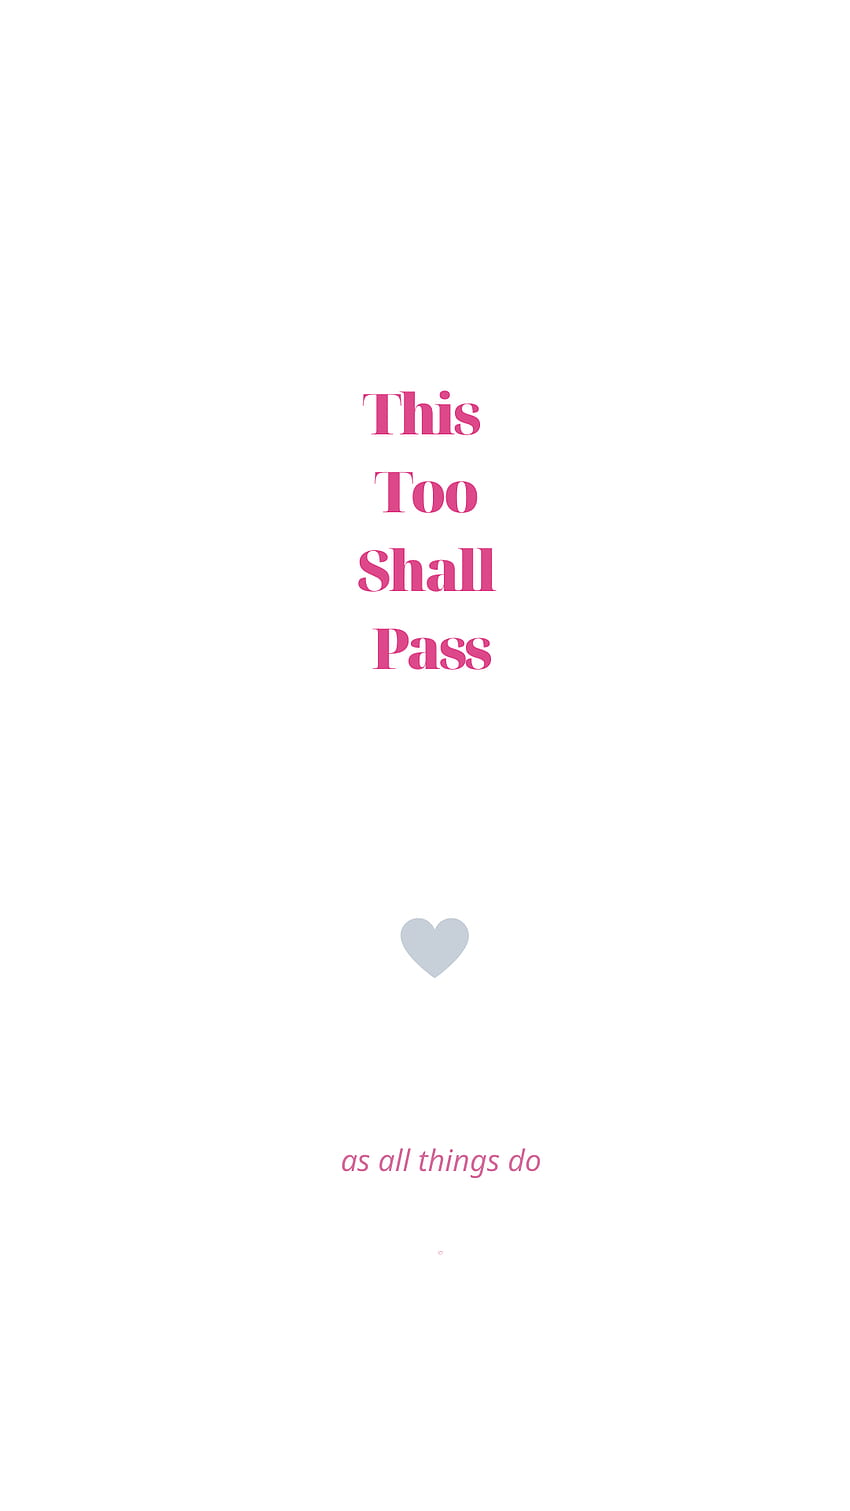 iPhone Wallpaper Project  This Too Shall Pass  Wallpaper project Cool  fonts Design classes